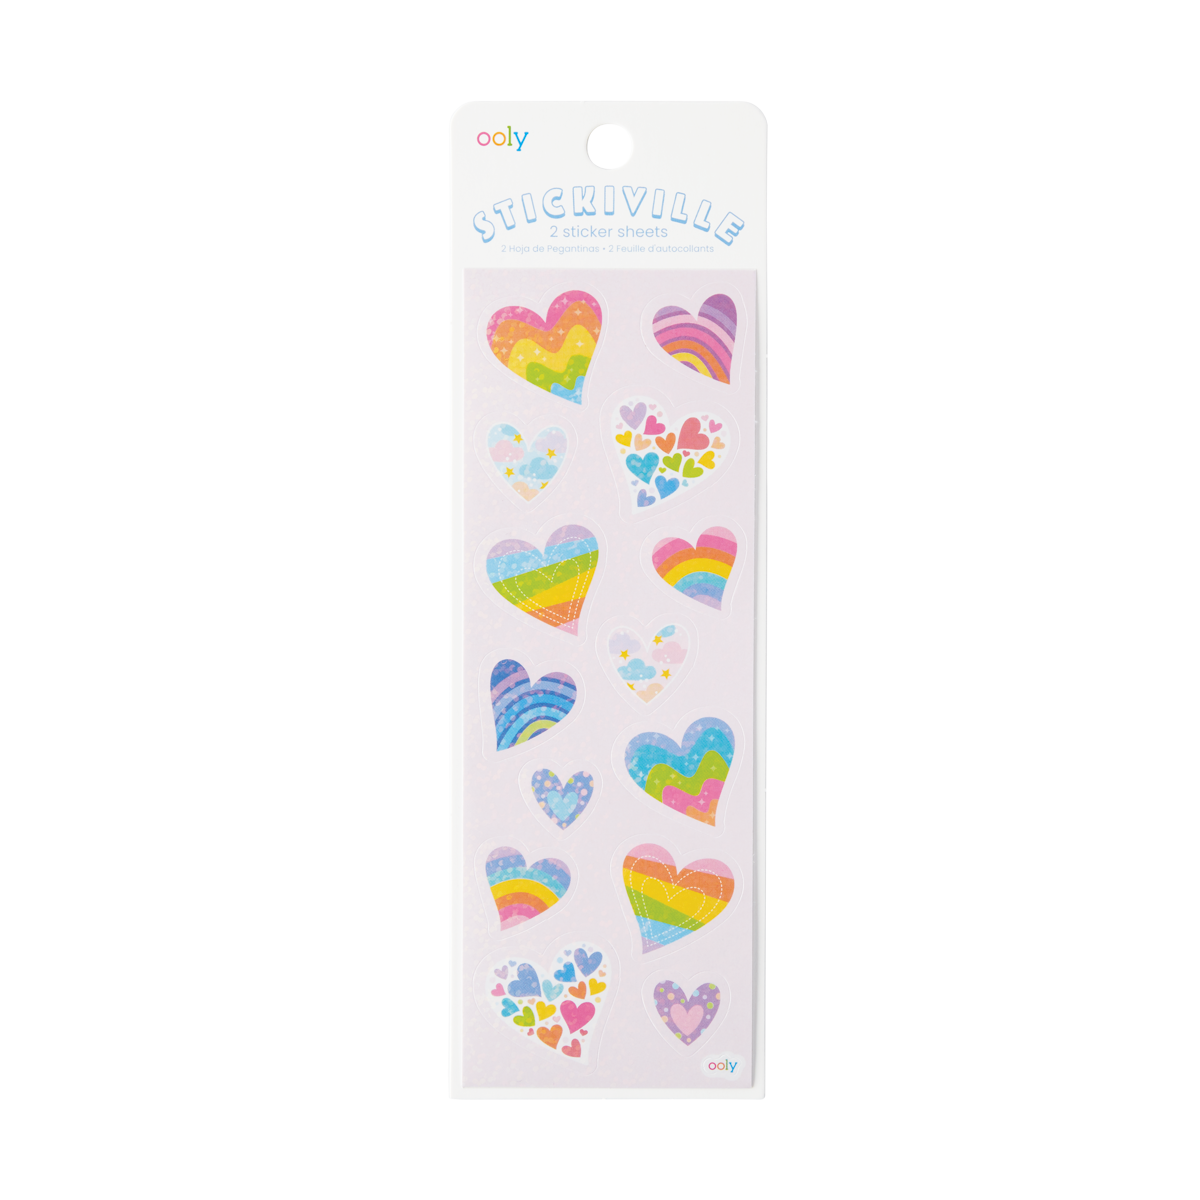 OOLY Stickiville Rainbow Hearts Stickers inside packaging